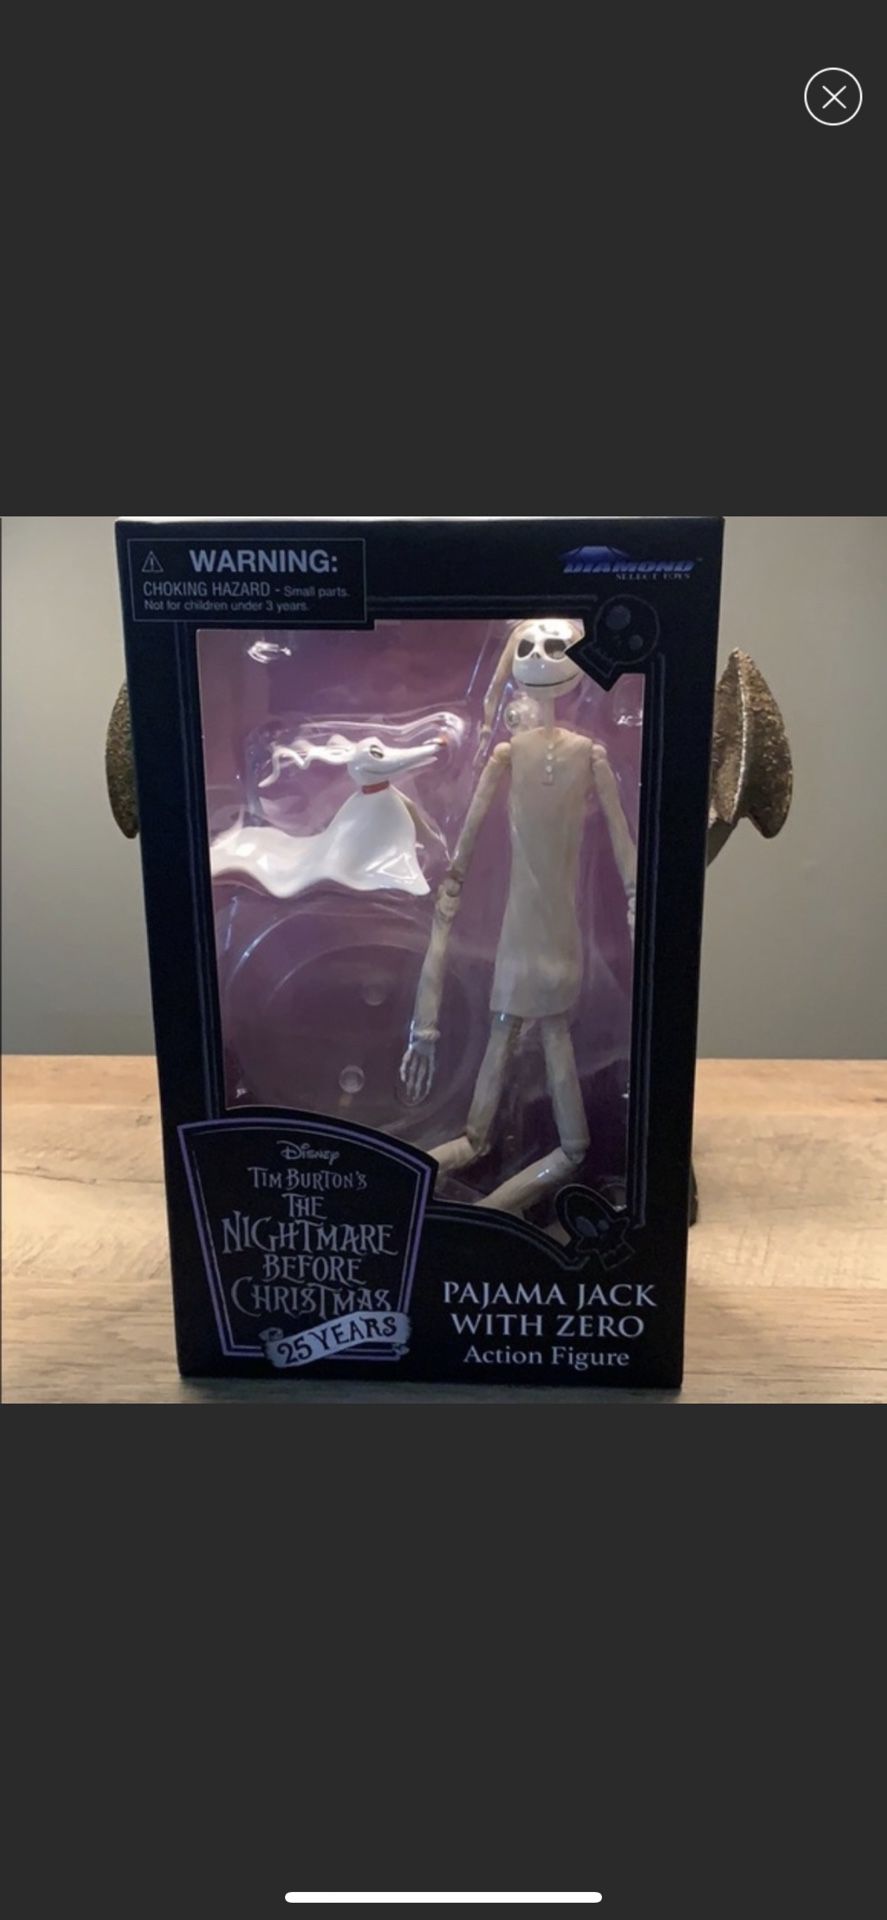 LIMITED EDITION 25th ANNIVERSARY MINT CONDITION BRAND NEW The nightmare before Christmas Pajama Jack with Zero Action Figure